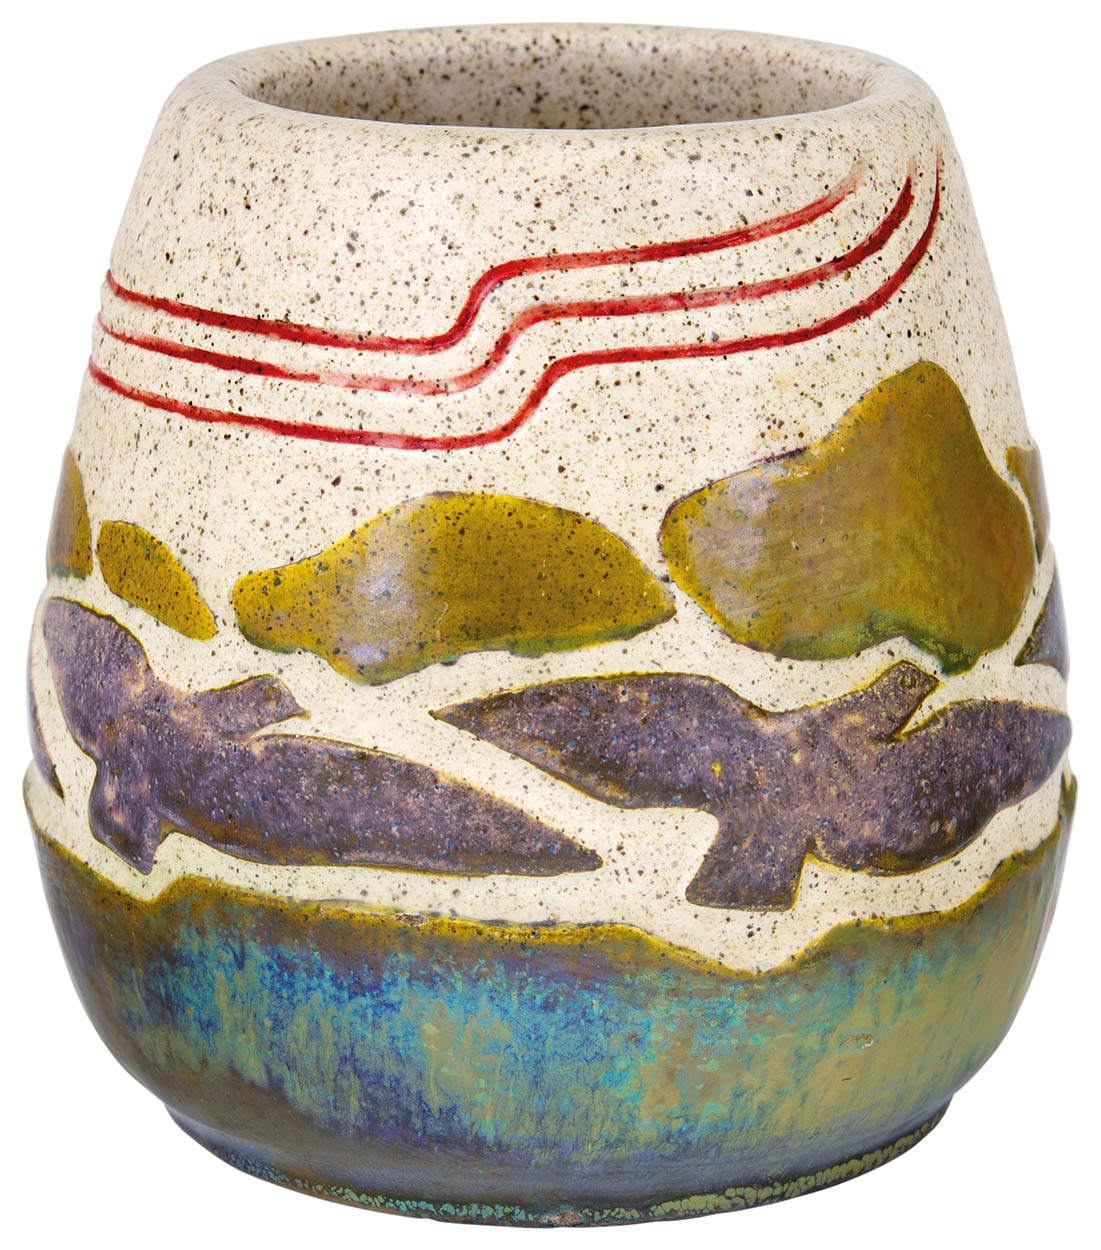 Zsolnay Vase with a Stylized Panorama of Flying Birds and Clouds, Zsolnay, 1903